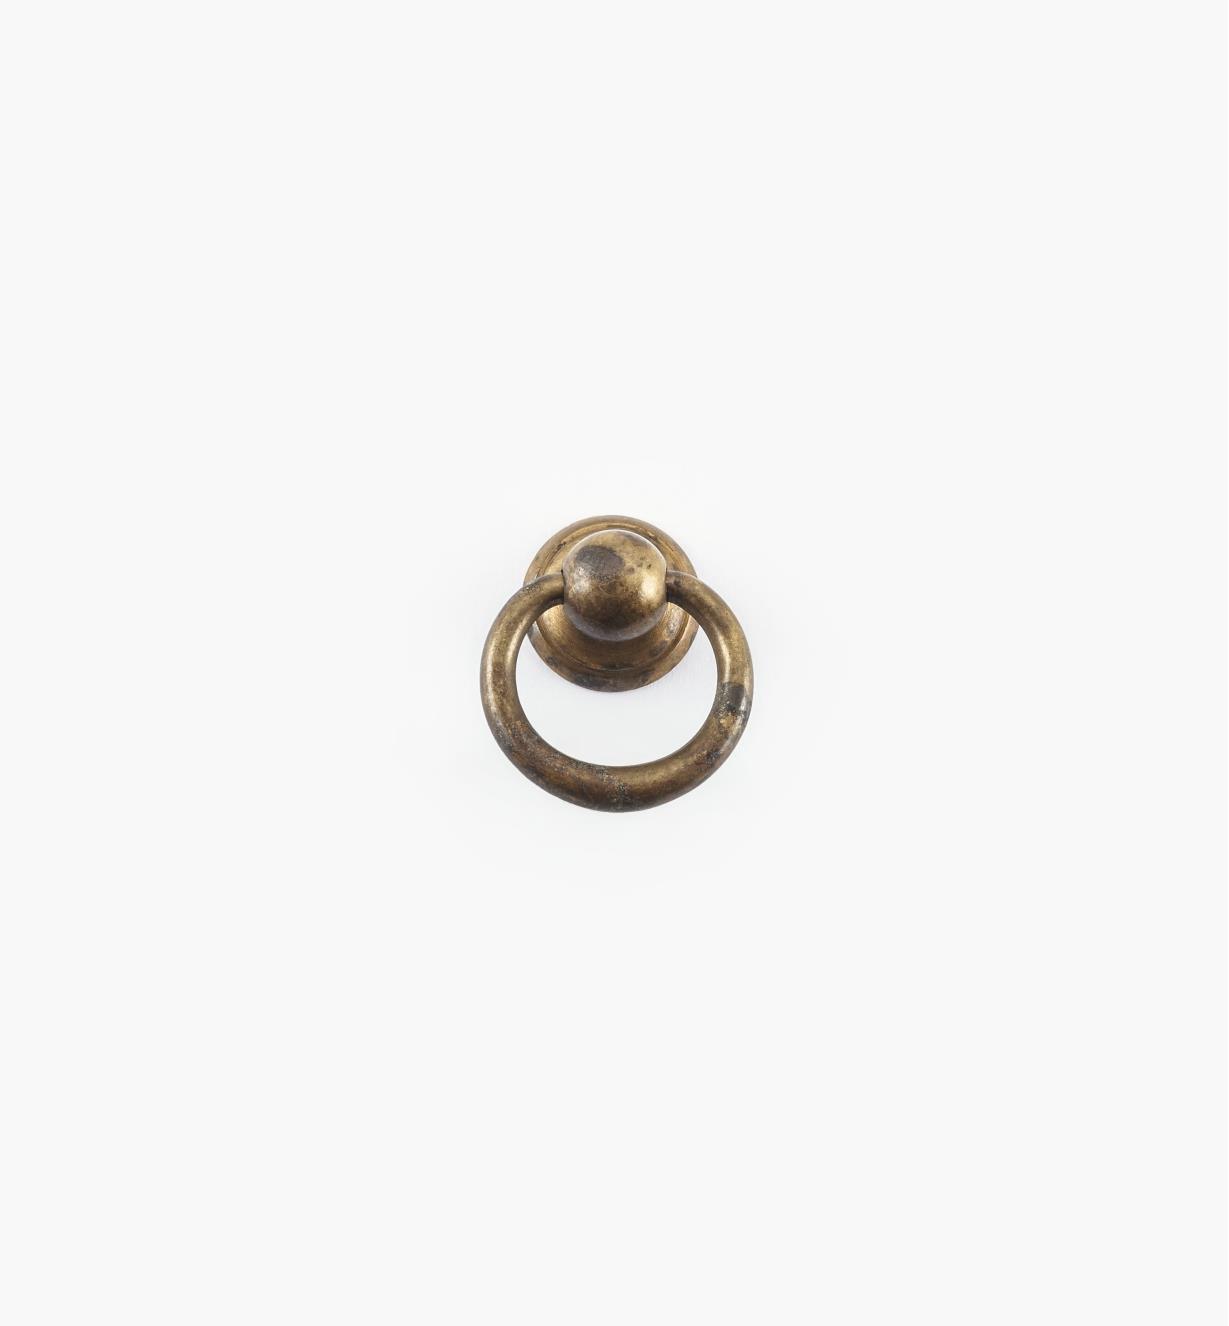 01A2301 - 23mm x 28mm Round Plate Ring Pull